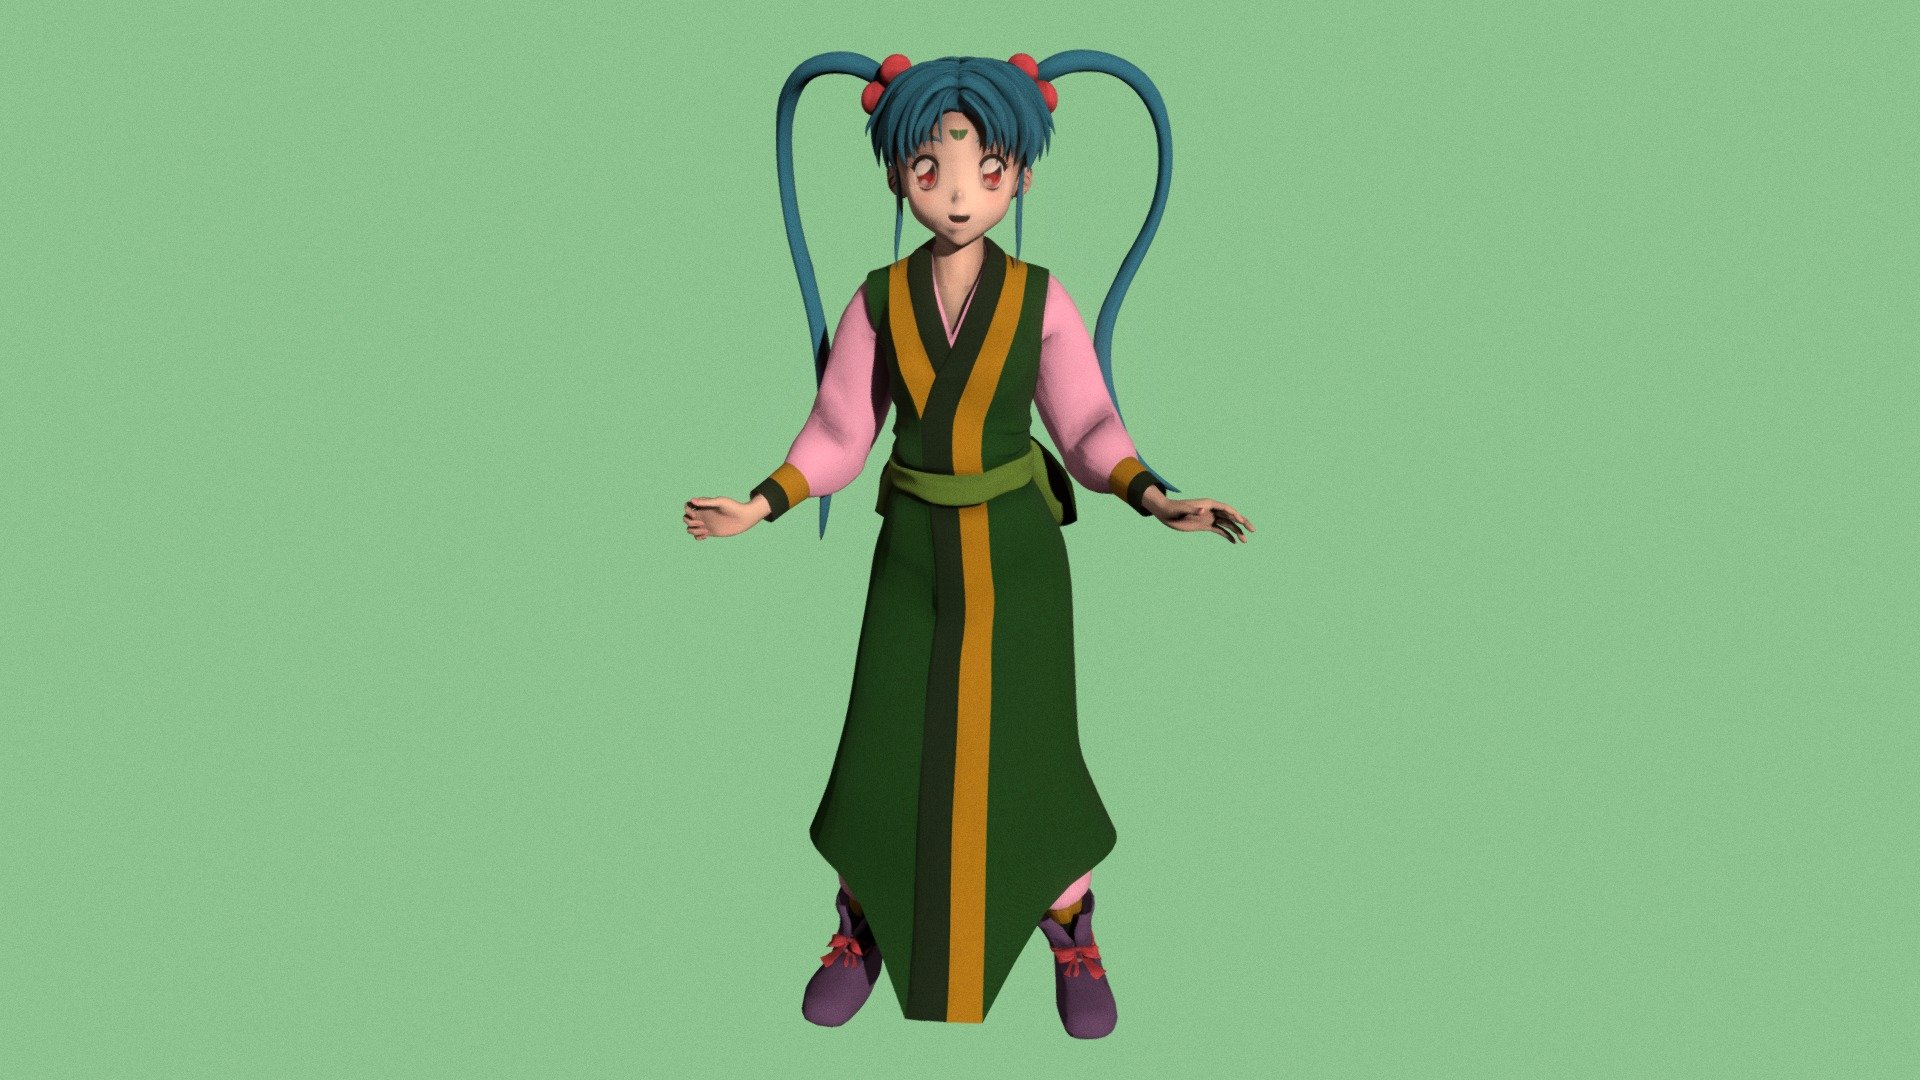 Posed model of anime girl Sasami Masaki Jurai (Tenchi Muyo).

This product include .FBX (ver. 7200) and .MAX (ver. 2010) files.

Rigged version: https://sketchfab.com/3d-models/t-pose-rigged-model-of-sasami-masaki-jurai-da11b33e221d4c208e32af9cbfb46dfd

I support convert this 3D model to various file formats: 3DS; AI; ASE; DAE; DWF; DWG; DXF; FLT; HTR; IGS; M3G; MQO; OBJ; SAT; STL; W3D; WRL; X.

You can buy all of my models in one pack to save cost: https://sketchfab.com/3d-models/all-of-my-anime-girls-c5a56156994e4193b9e8fa21a3b8360b

And I can make commission models.

If you have any questions, please leave a comment or contact me via my email 3d.eden.project@gmail.com 3d model